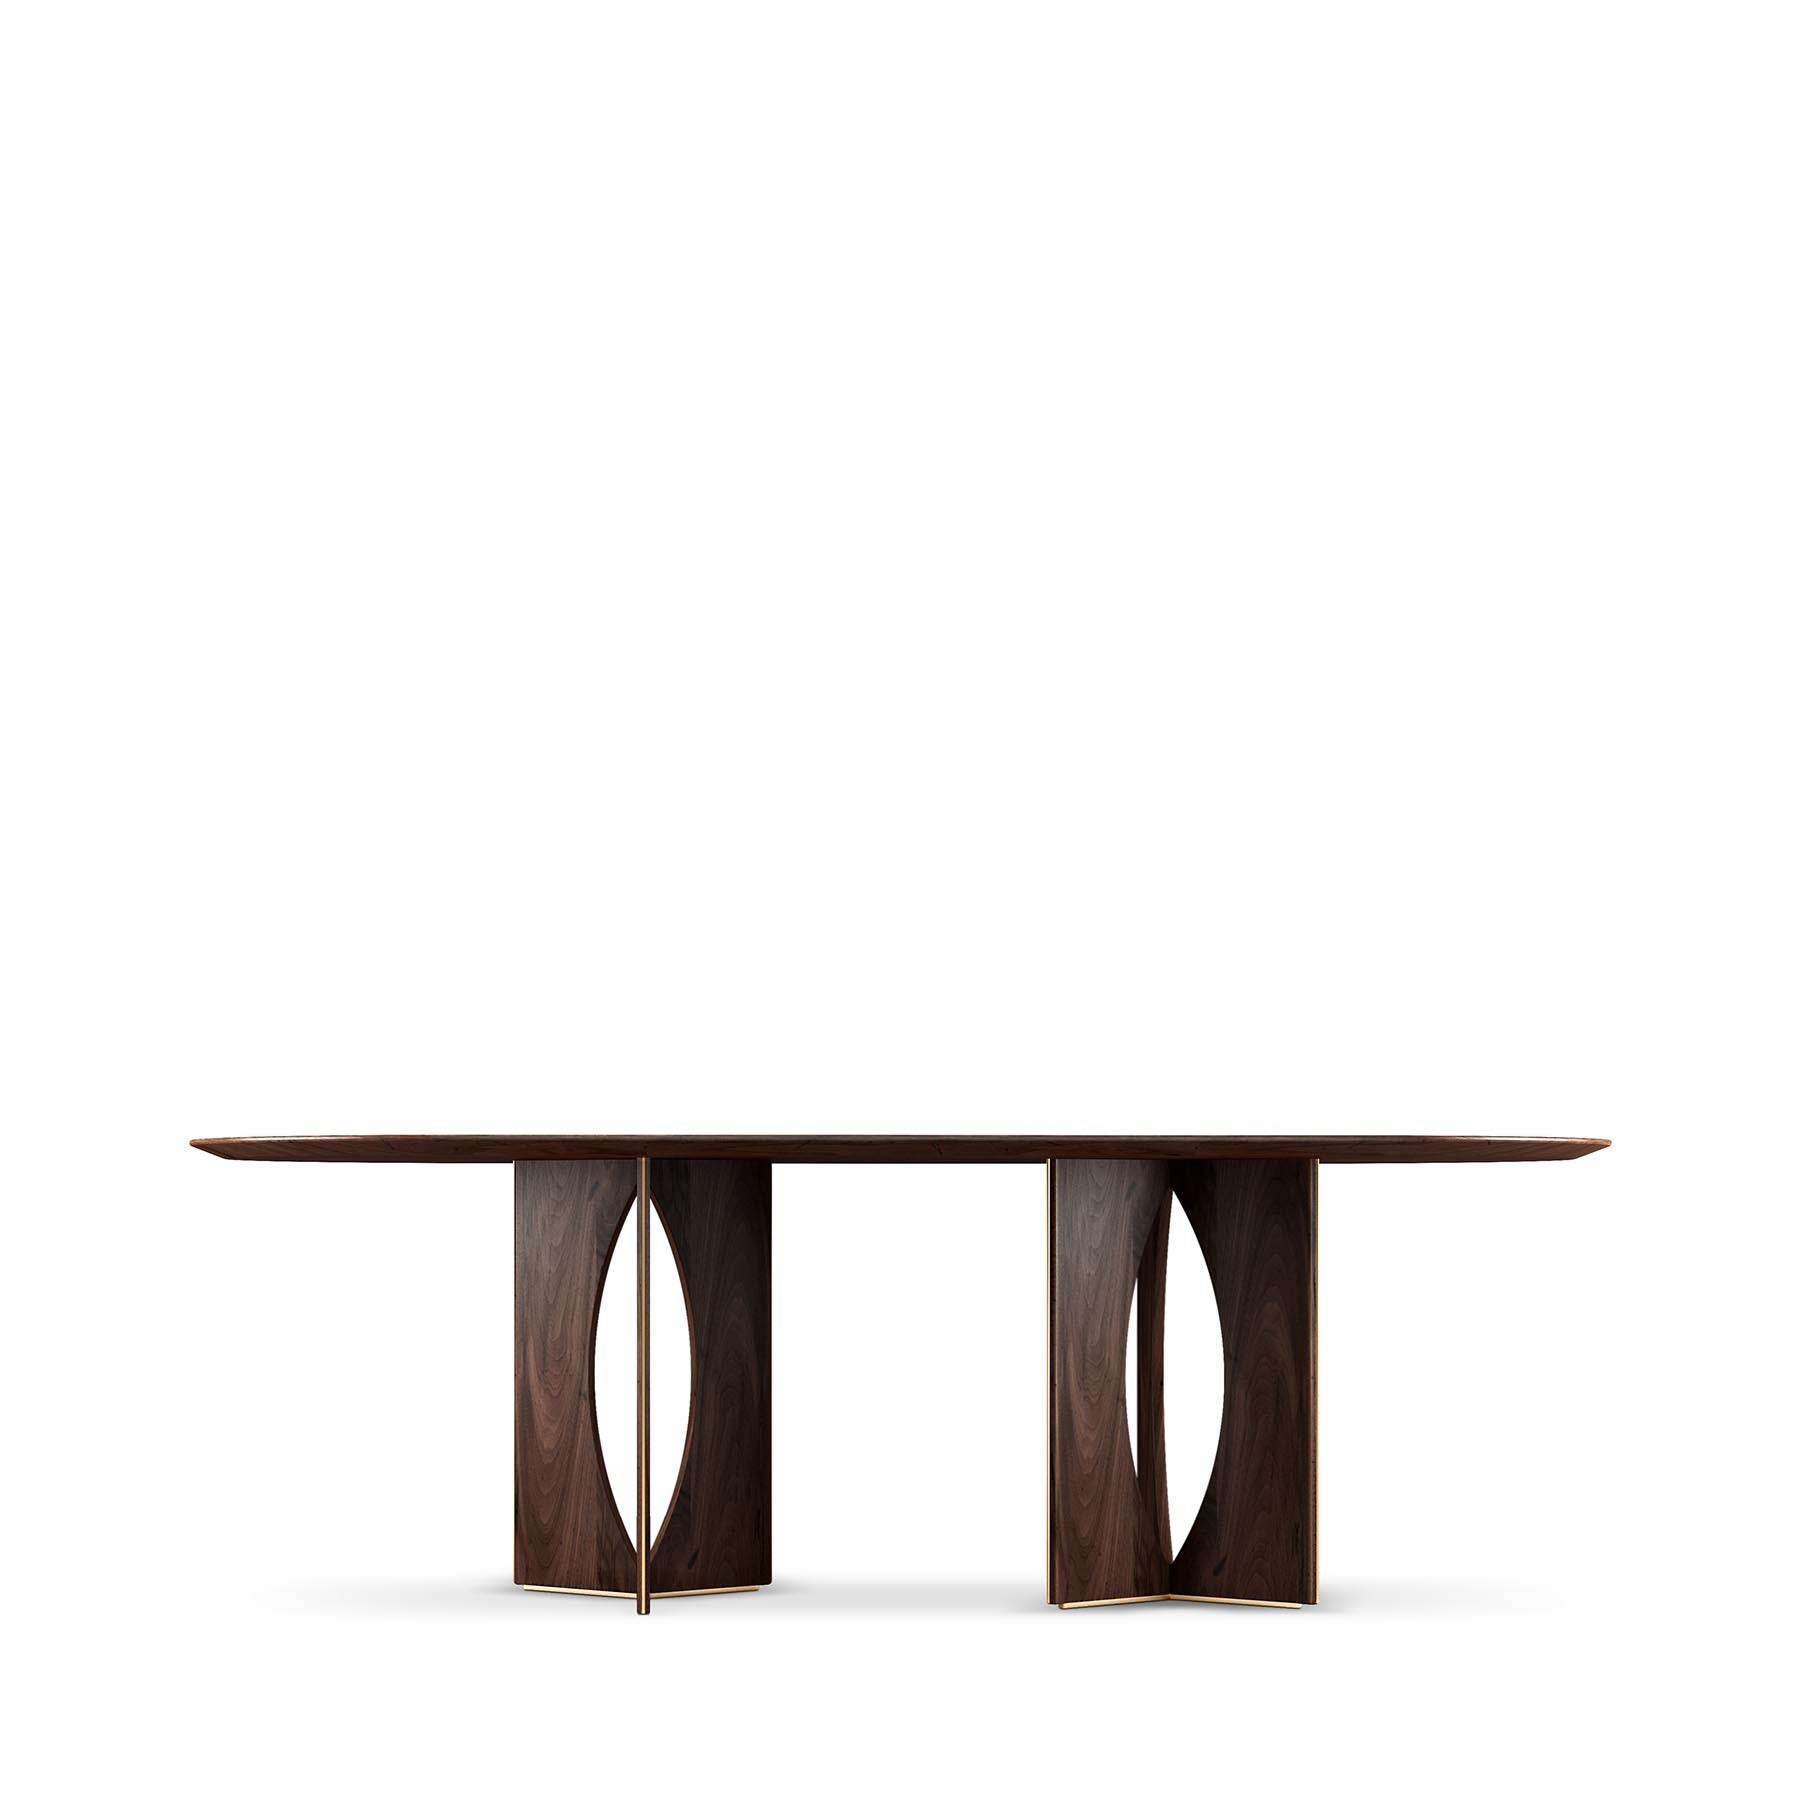 TAYLOR - DINING TABLE | Modern Furniture + Decor